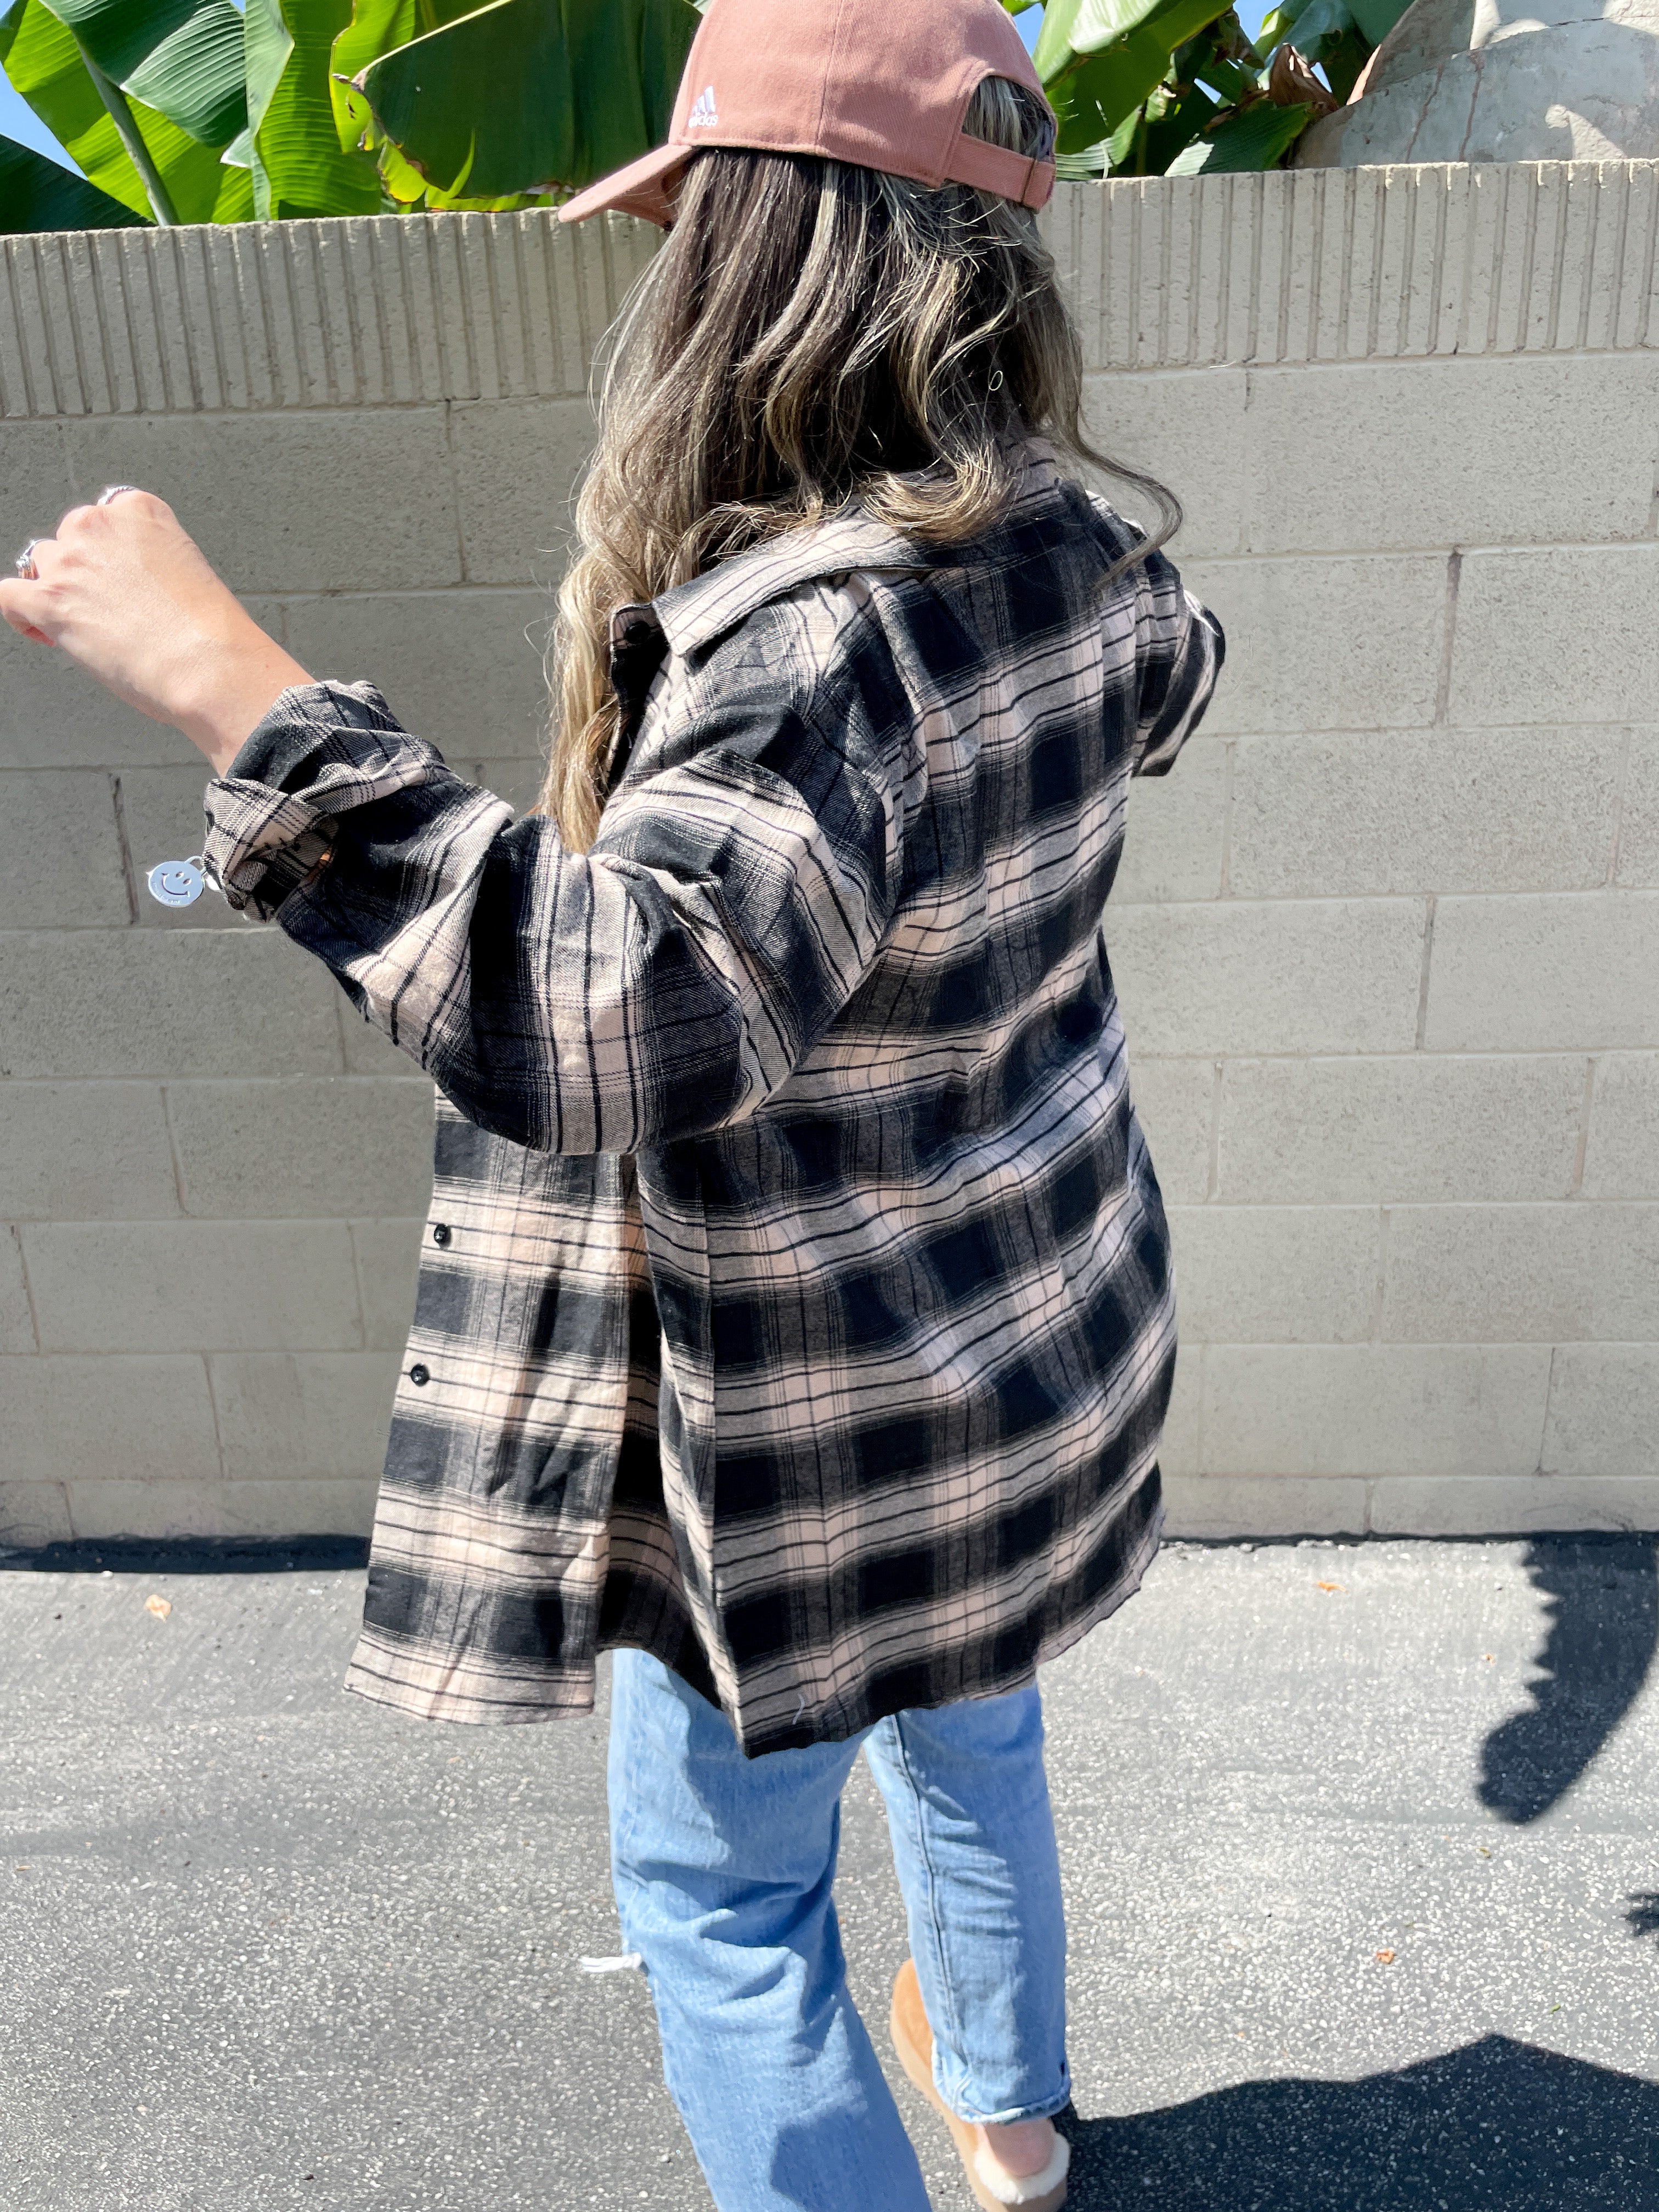 The Best Flannel Ever (Tan/Black)